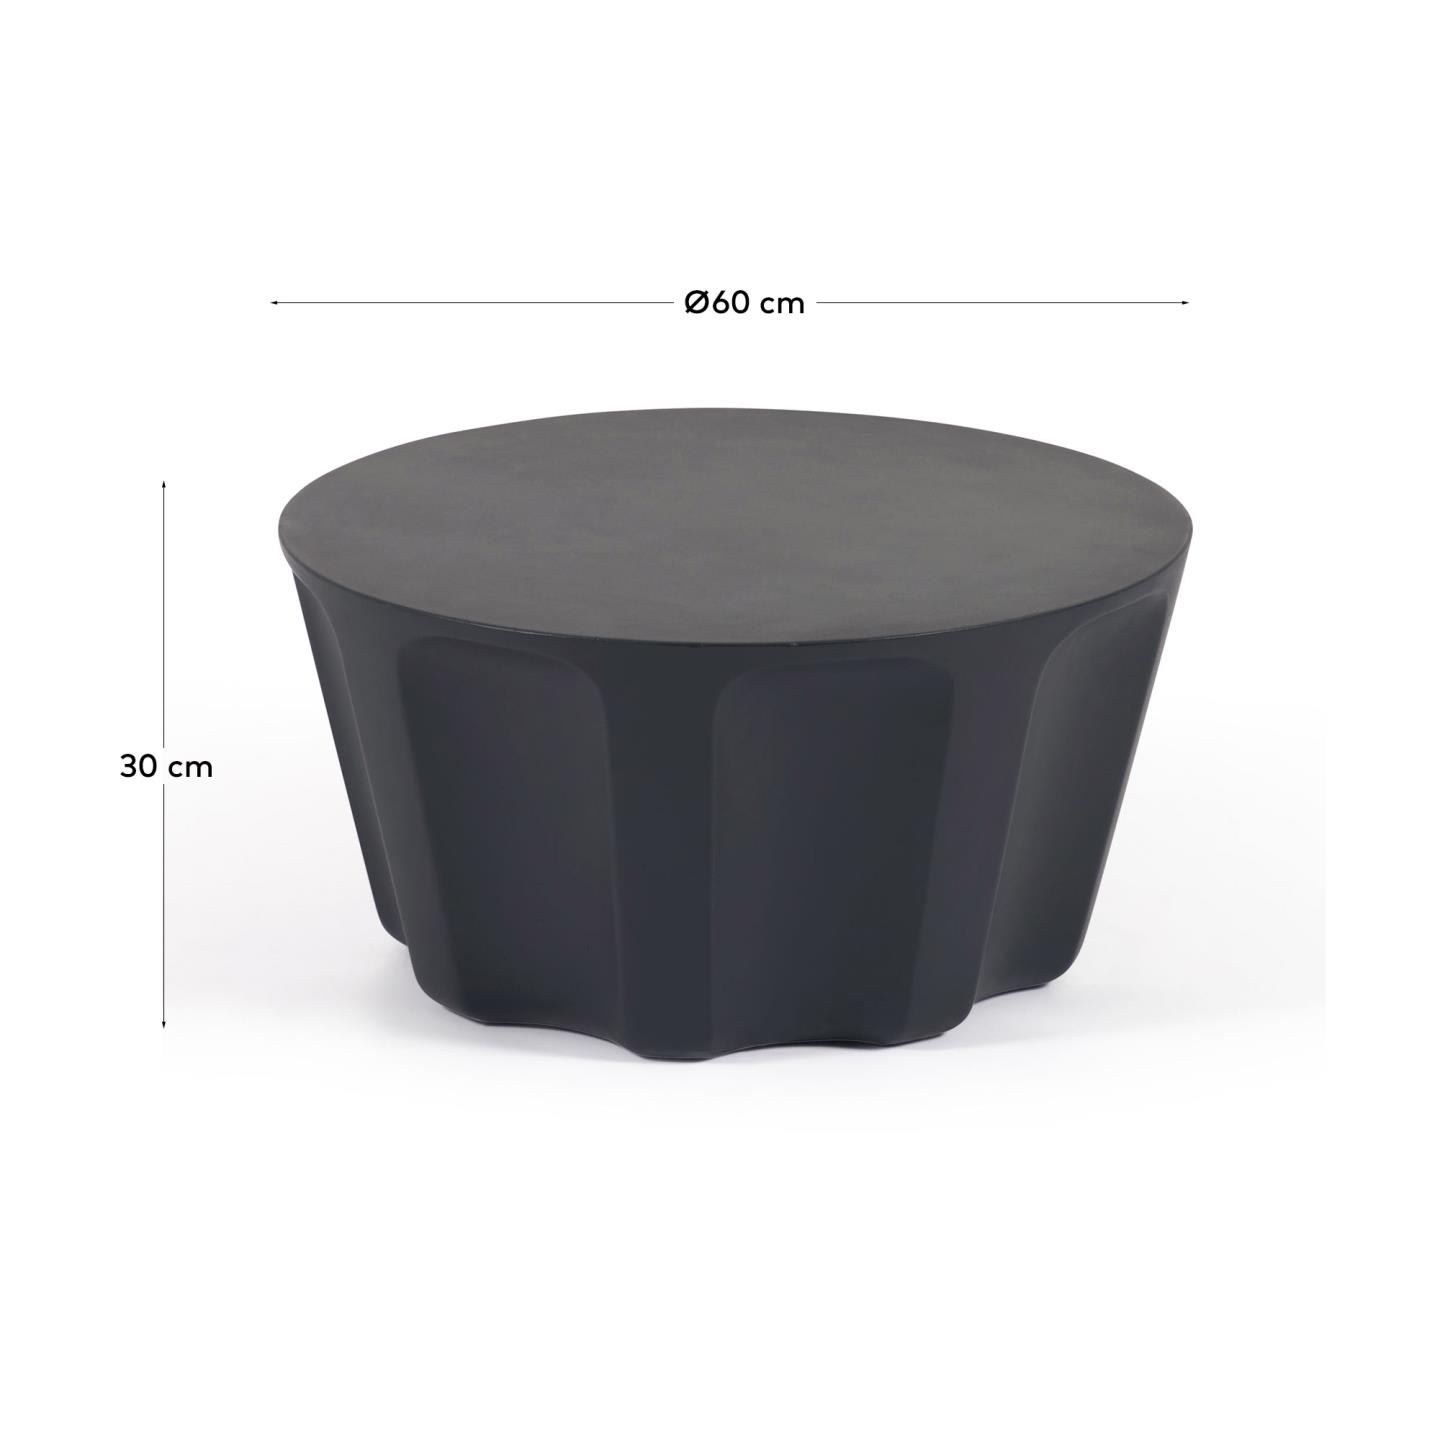 Vilandra round outdoor coffee table made of concrete with black finish Ø 60 cm - sizes